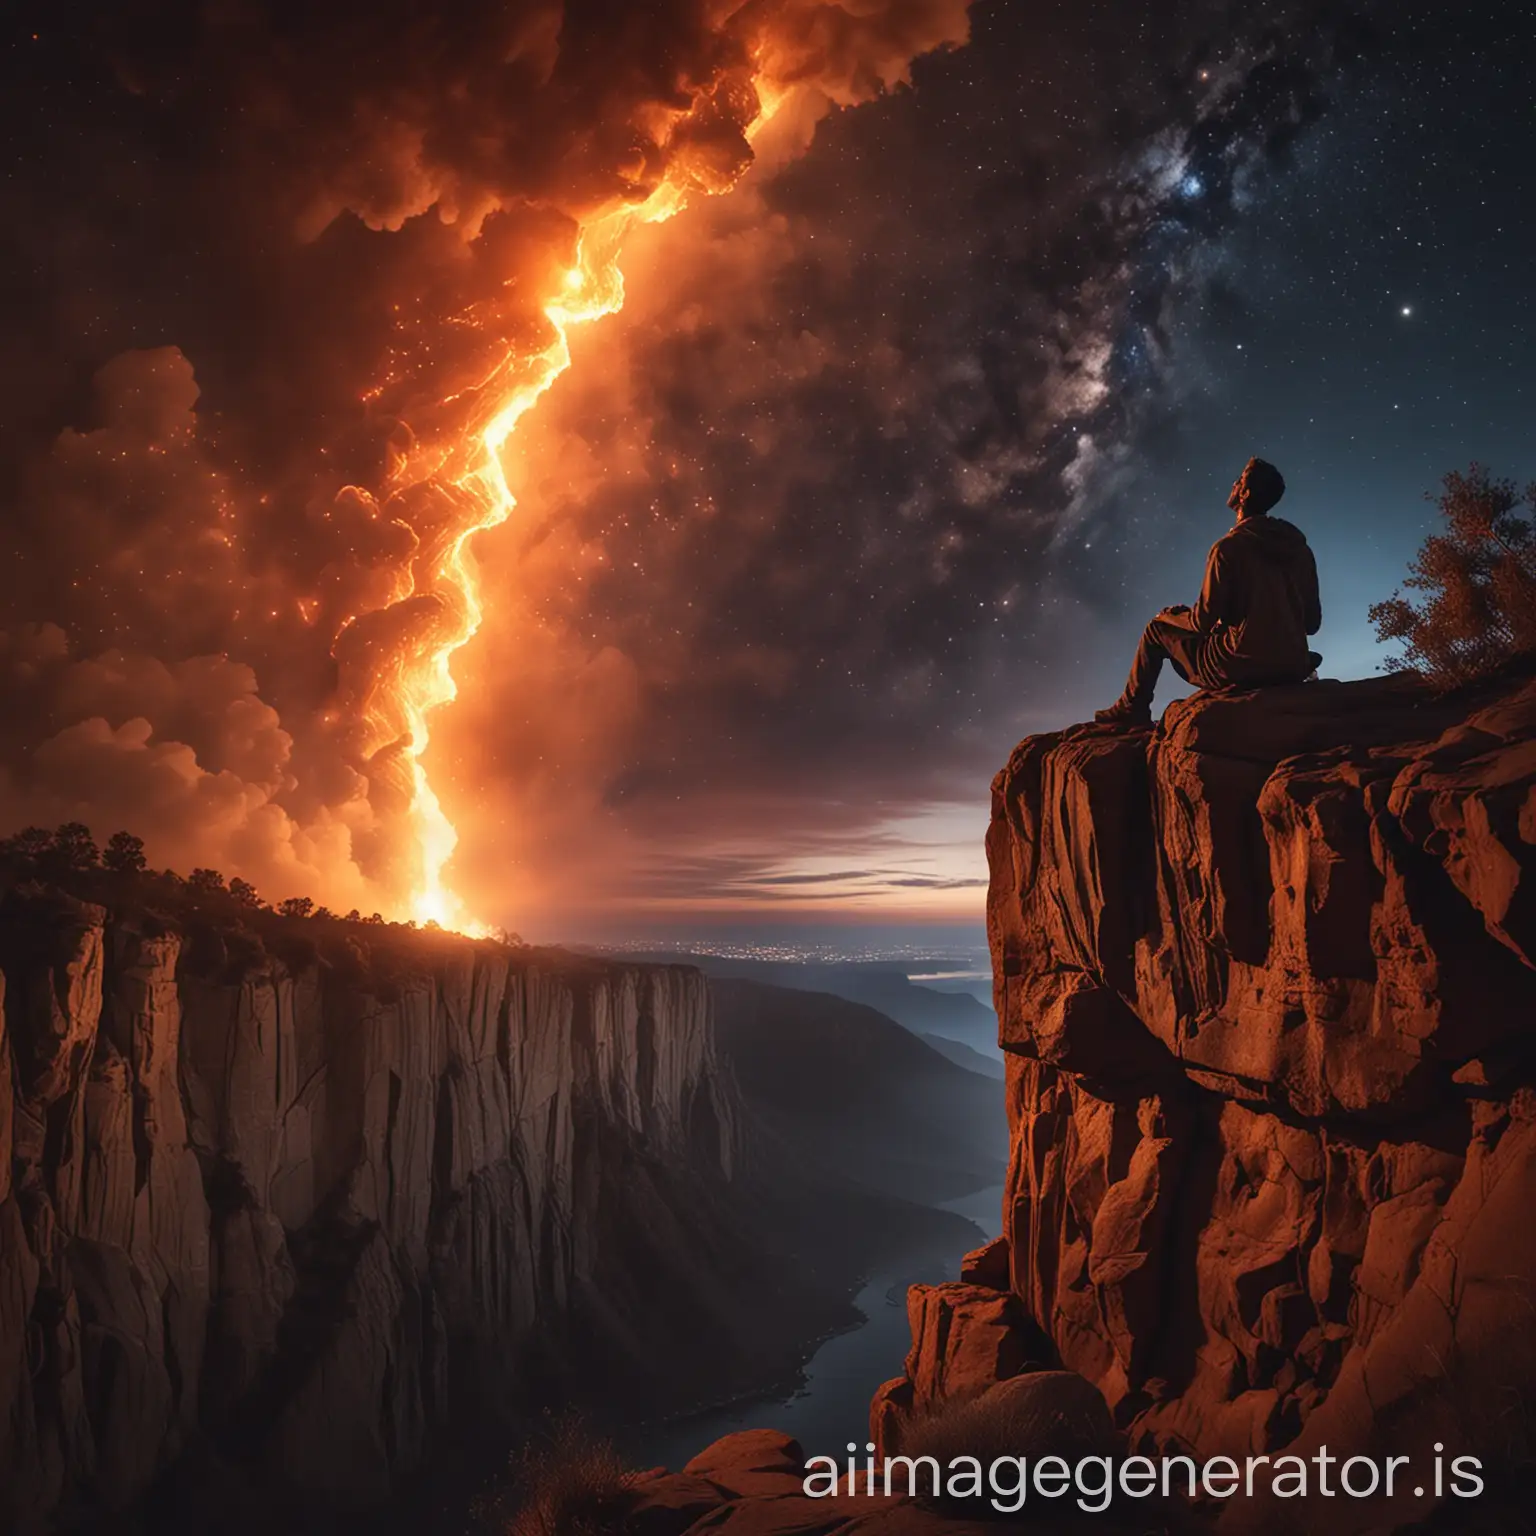 Man seated on the edge of a cliff at night looking up into  while the sky is filled with fire and translucent image of god